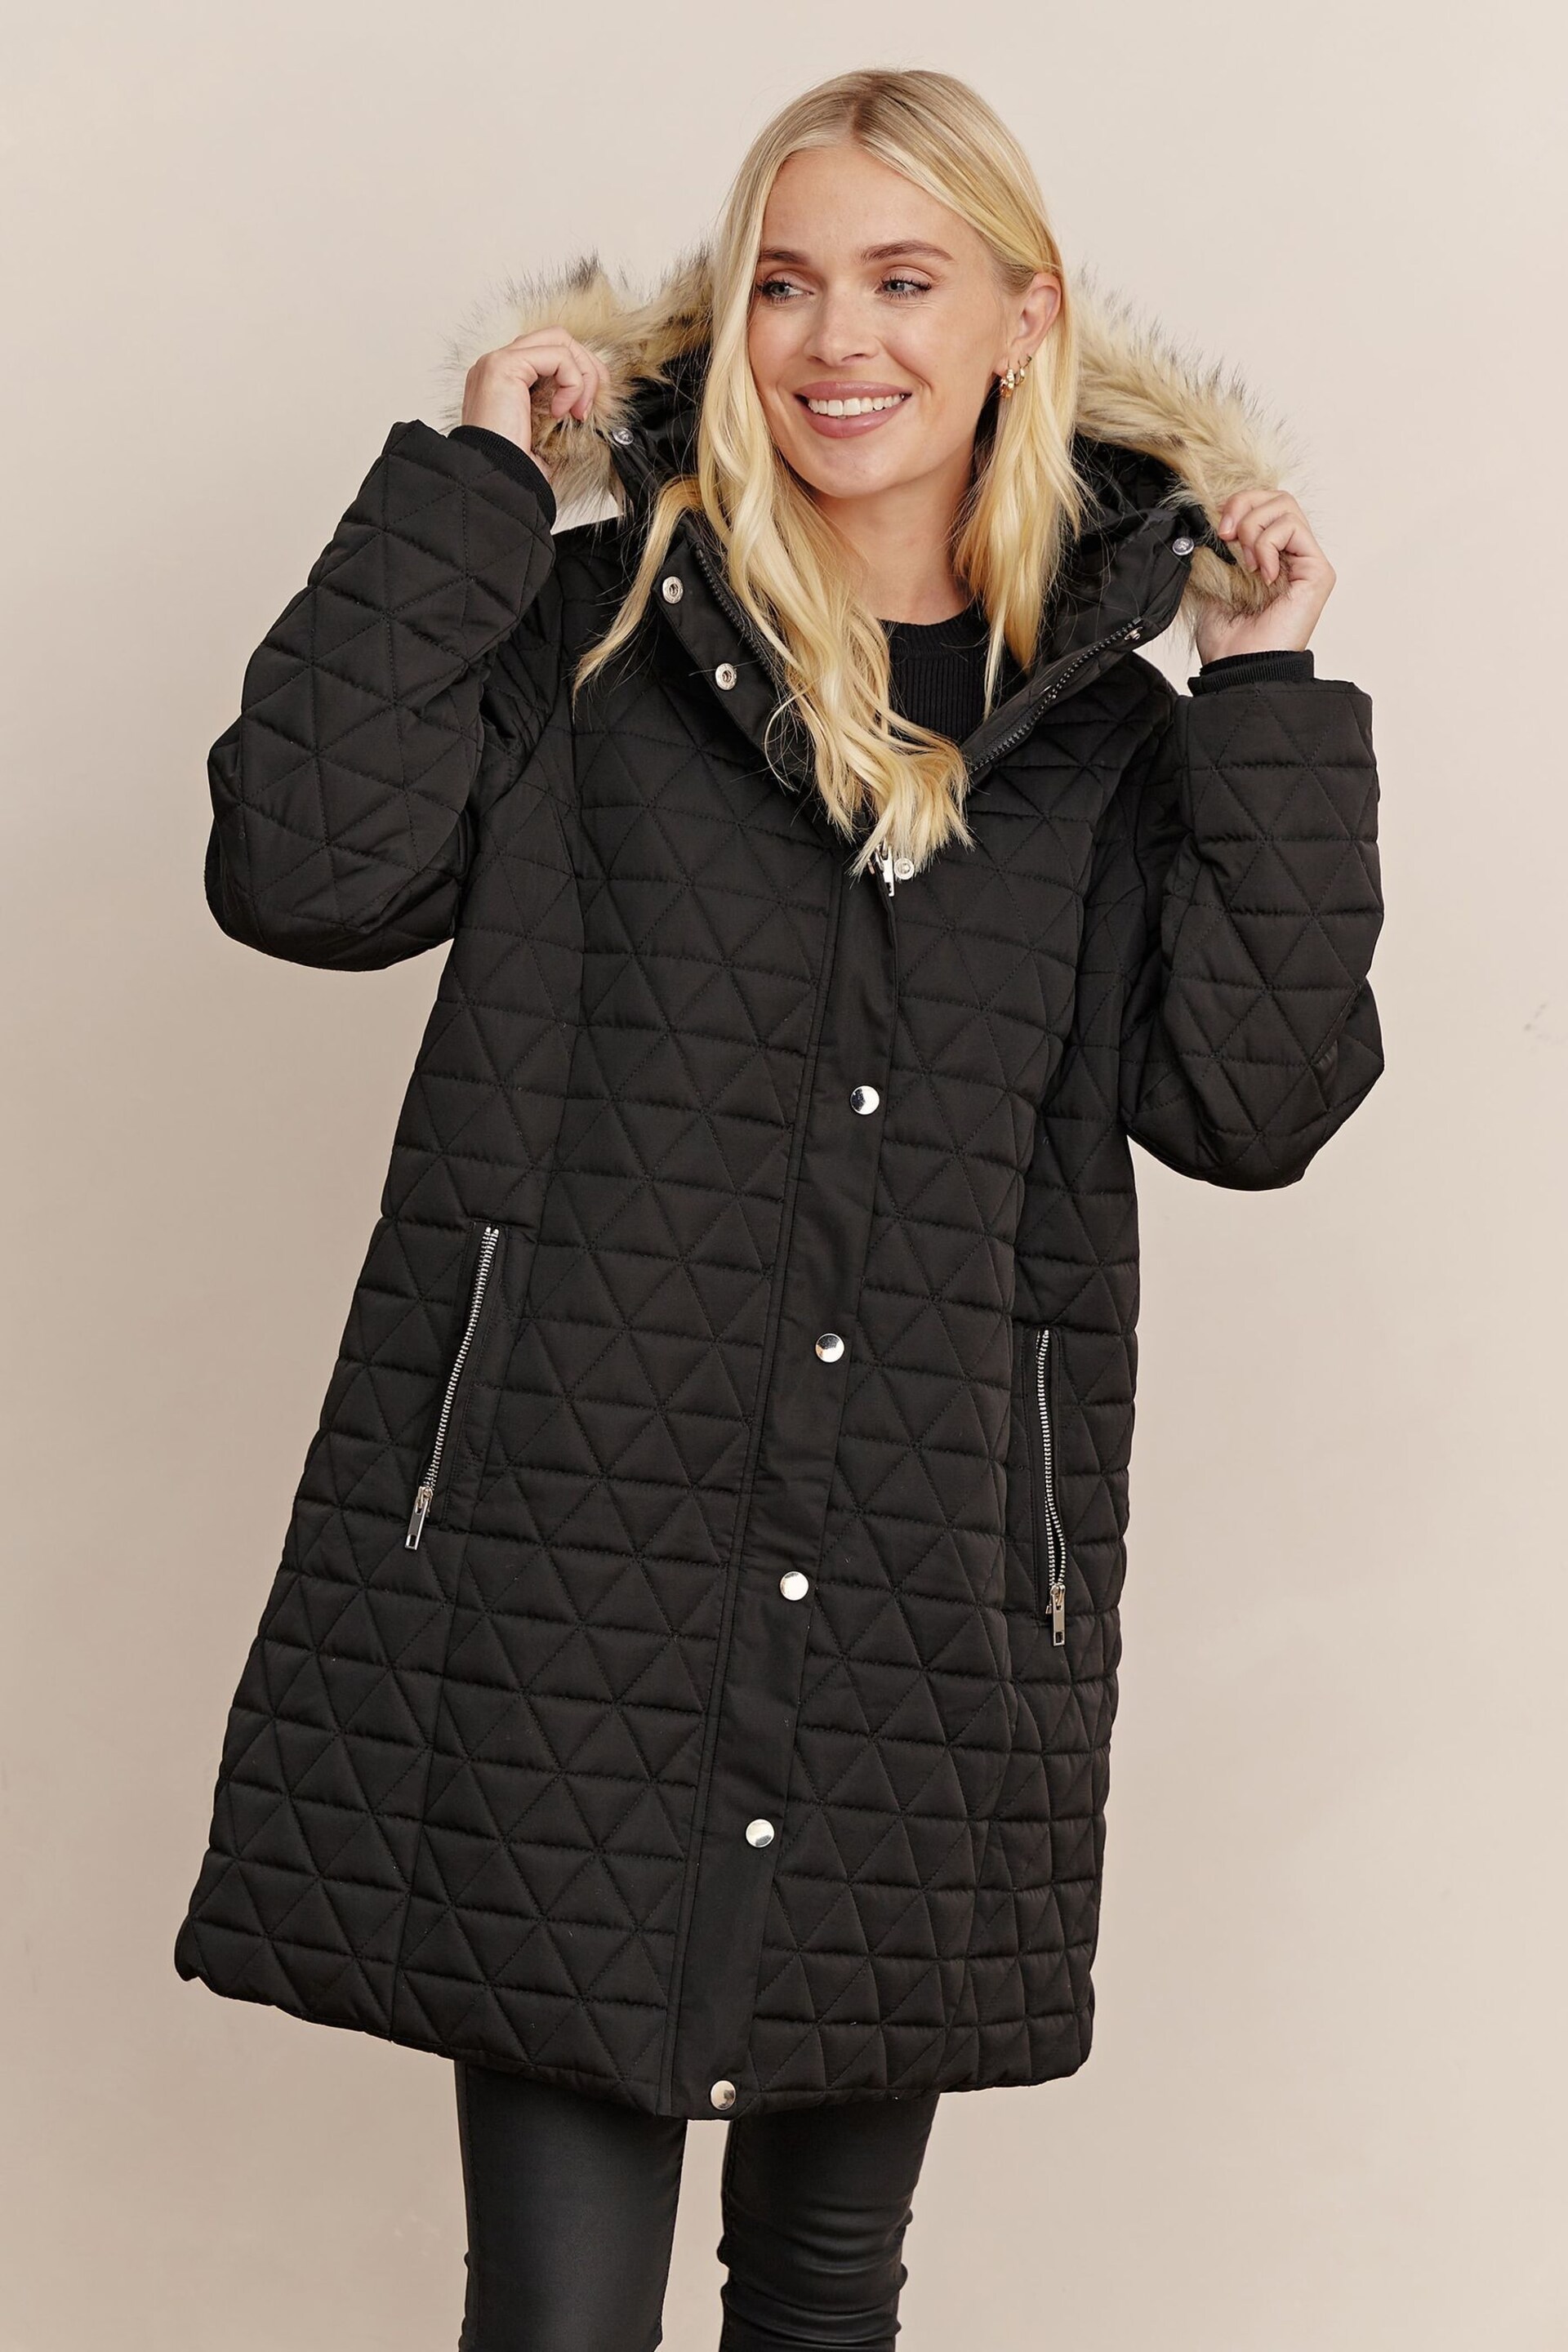 Society 8 Romy Black Quilted Faux Fur Puffer Coat - Image 5 of 6